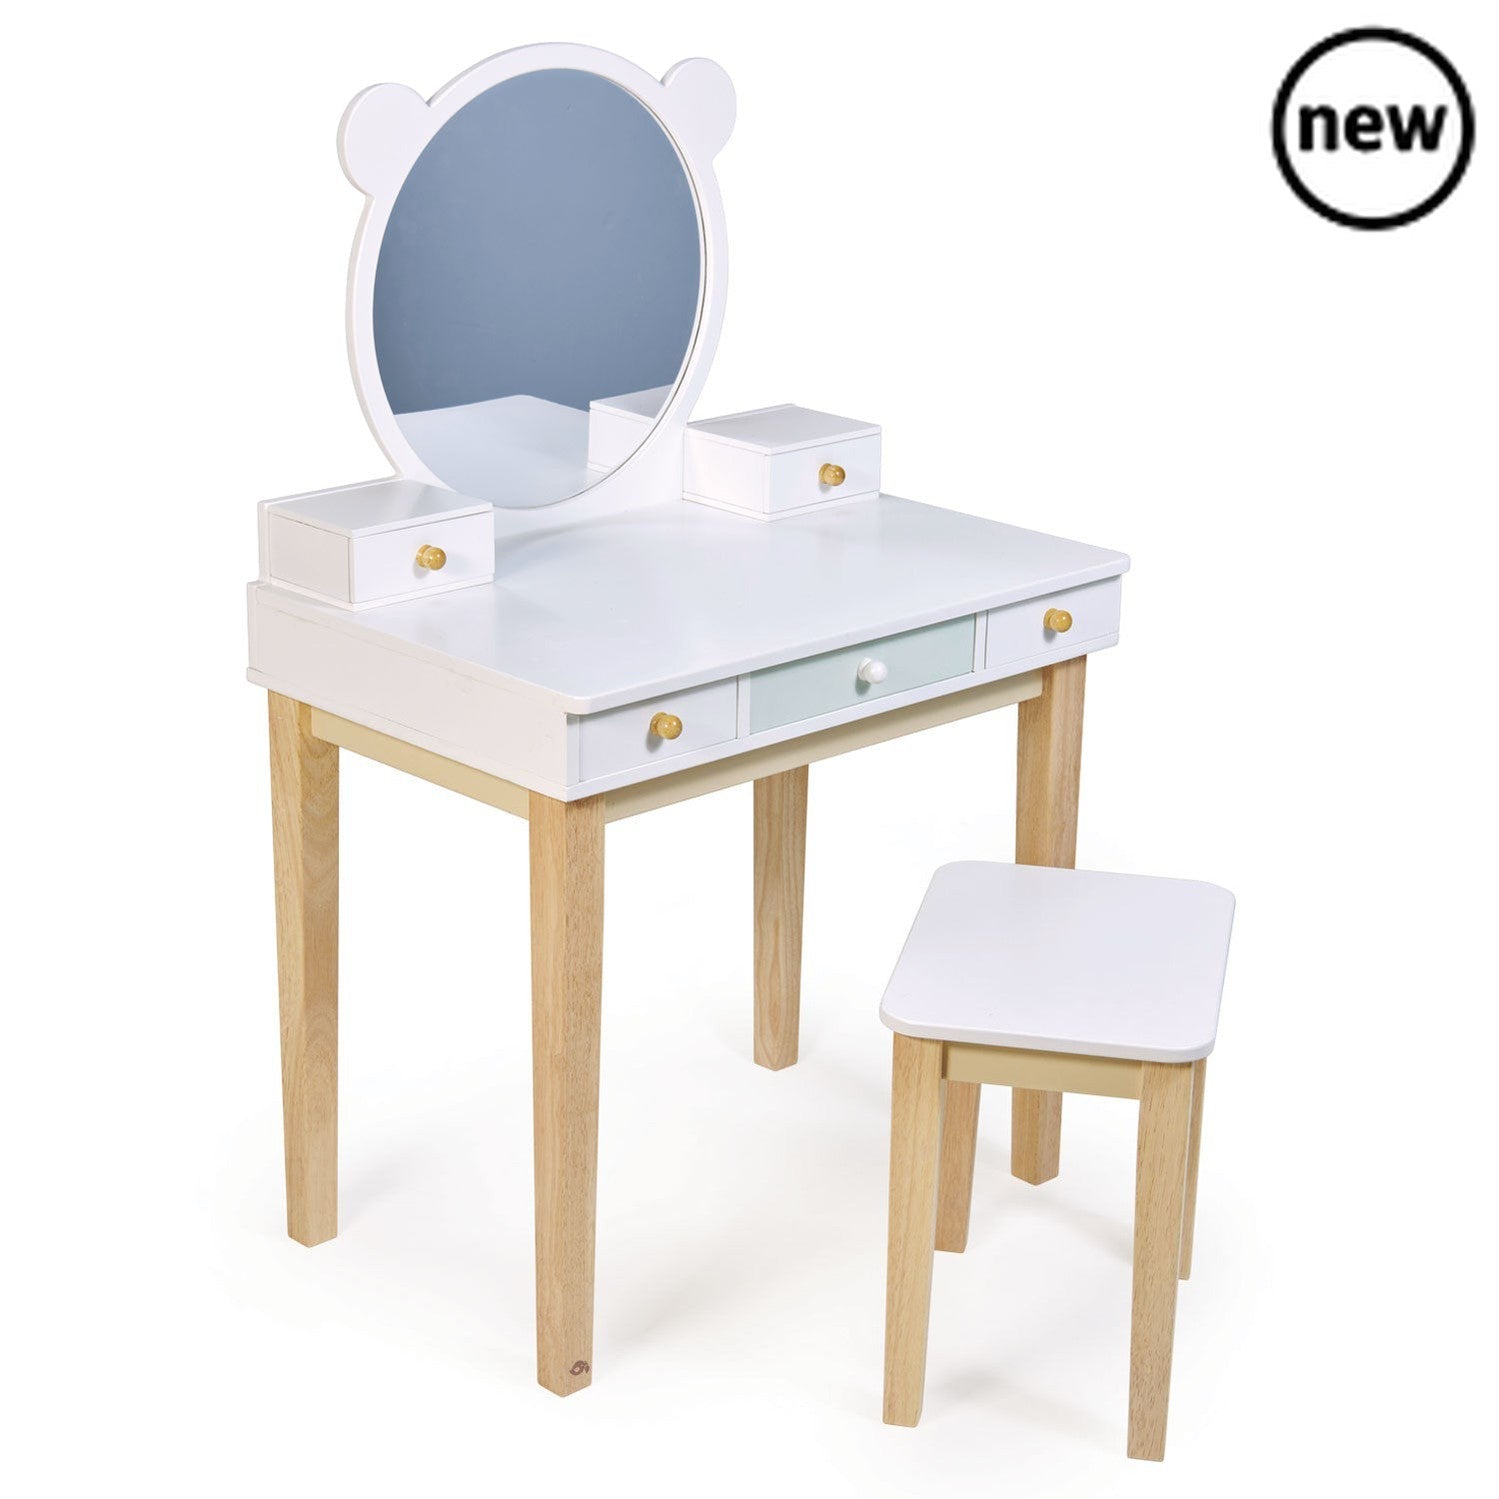 Tenderleaf Toys Wooden Forest Dressing Table, Part of our beautiful forest furniture collection, this dressing table and stool is perfect for any little boy or girl. With a total of 5 drawers, there is plenty of storage for little treasures. A generous large round mirror inspired by our forest friends. Measurements 0.690.1650.515 meters h w d 0.058633m3 16.11kg, Tenderleaf Toys Wooden Forest Dressing Table,Wooden Toys,Tenderleaf, 